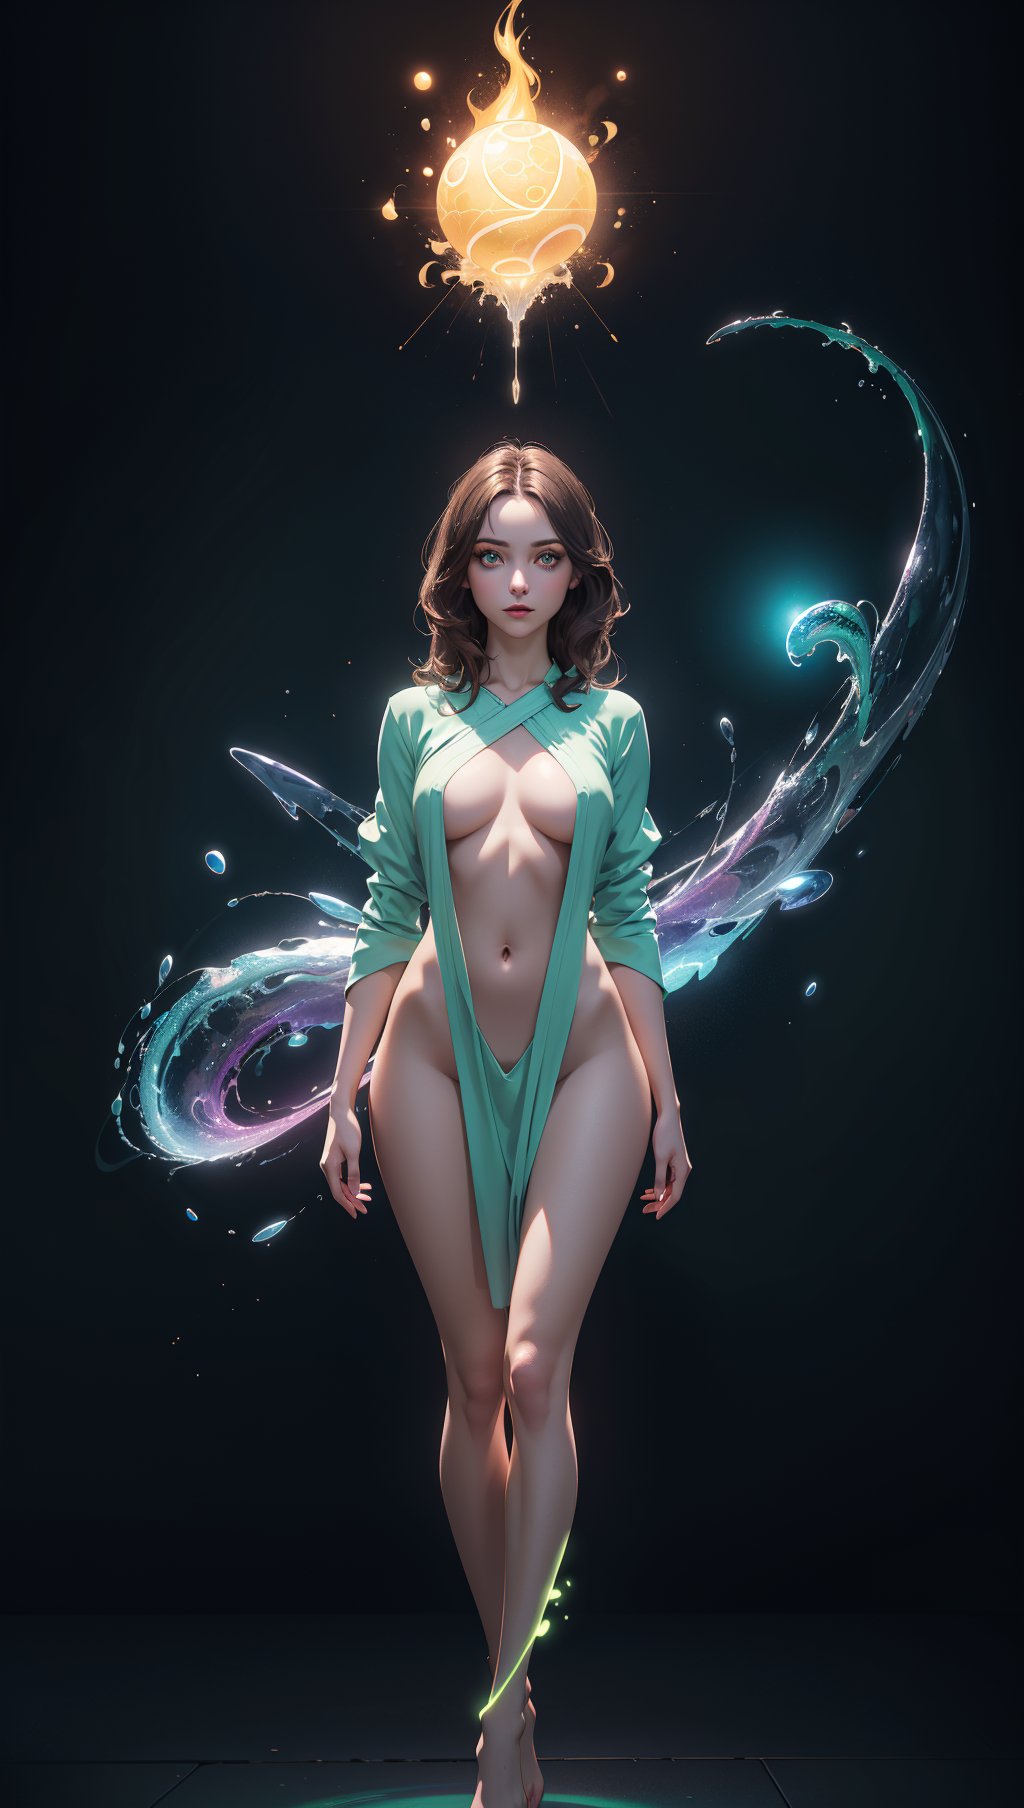 Detailed background,(dungeon with spirits flying about),particles,(style-swirlmagic:0.9),floating particles,glowing orb,masterpiece,(realistic,photo-realistic:1.37),22 year old woman,brown flowing hair,(green glowing eyes),beautiful face,perfect illumination,looking at viewer,(wearing sorcerer robes)(body illumination:1.5),((full body shot,standing)),